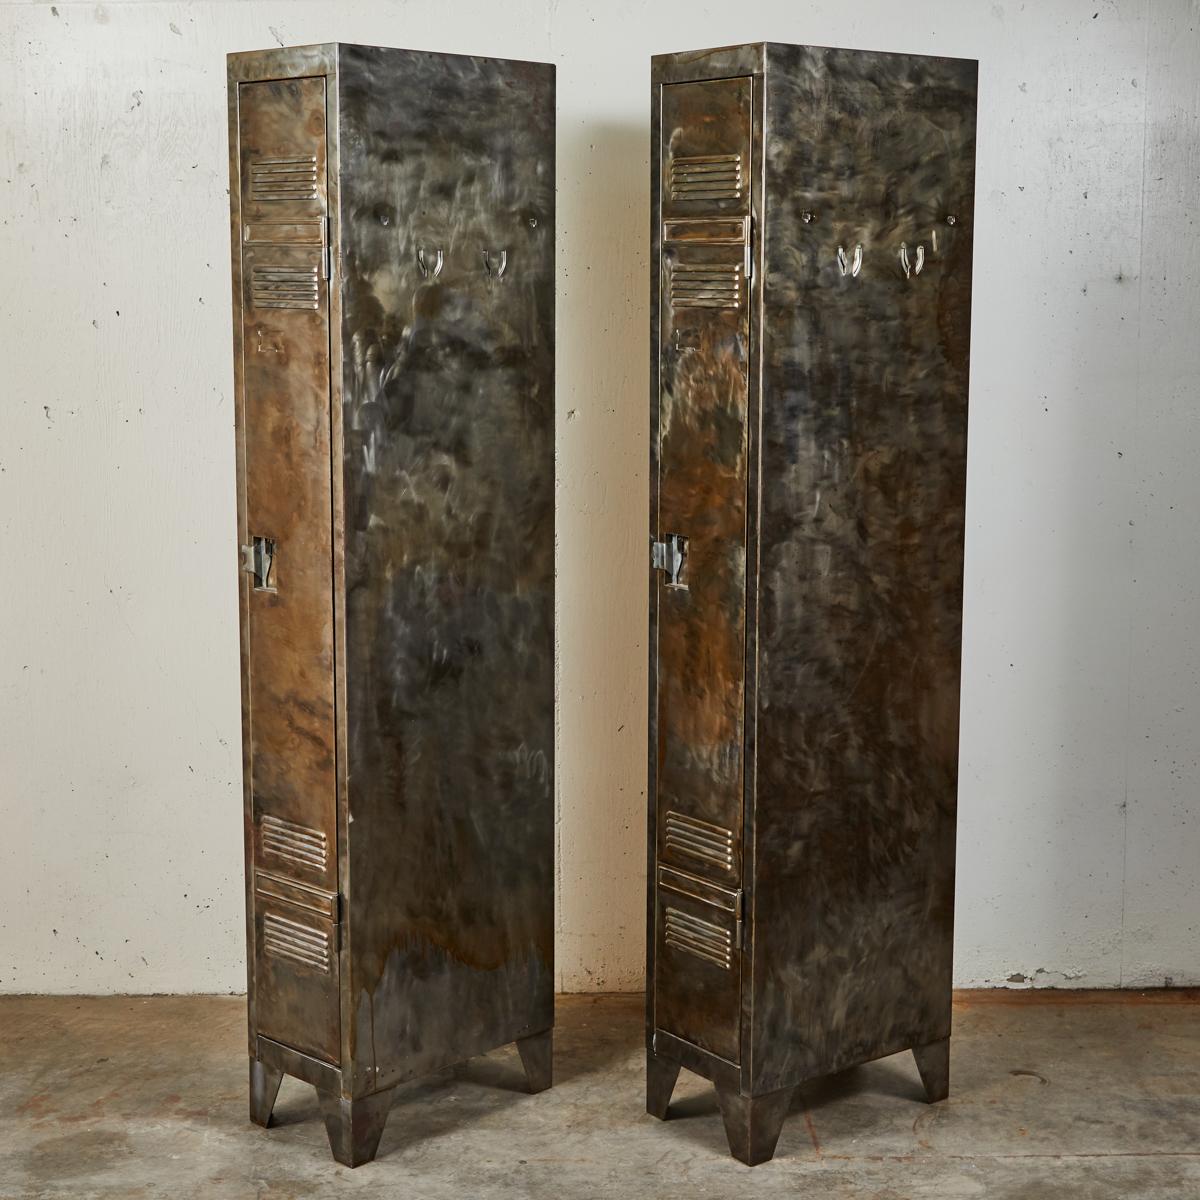 A pair of tall narrow lockers with upper and lower vents, latch locks and angle cut feet.